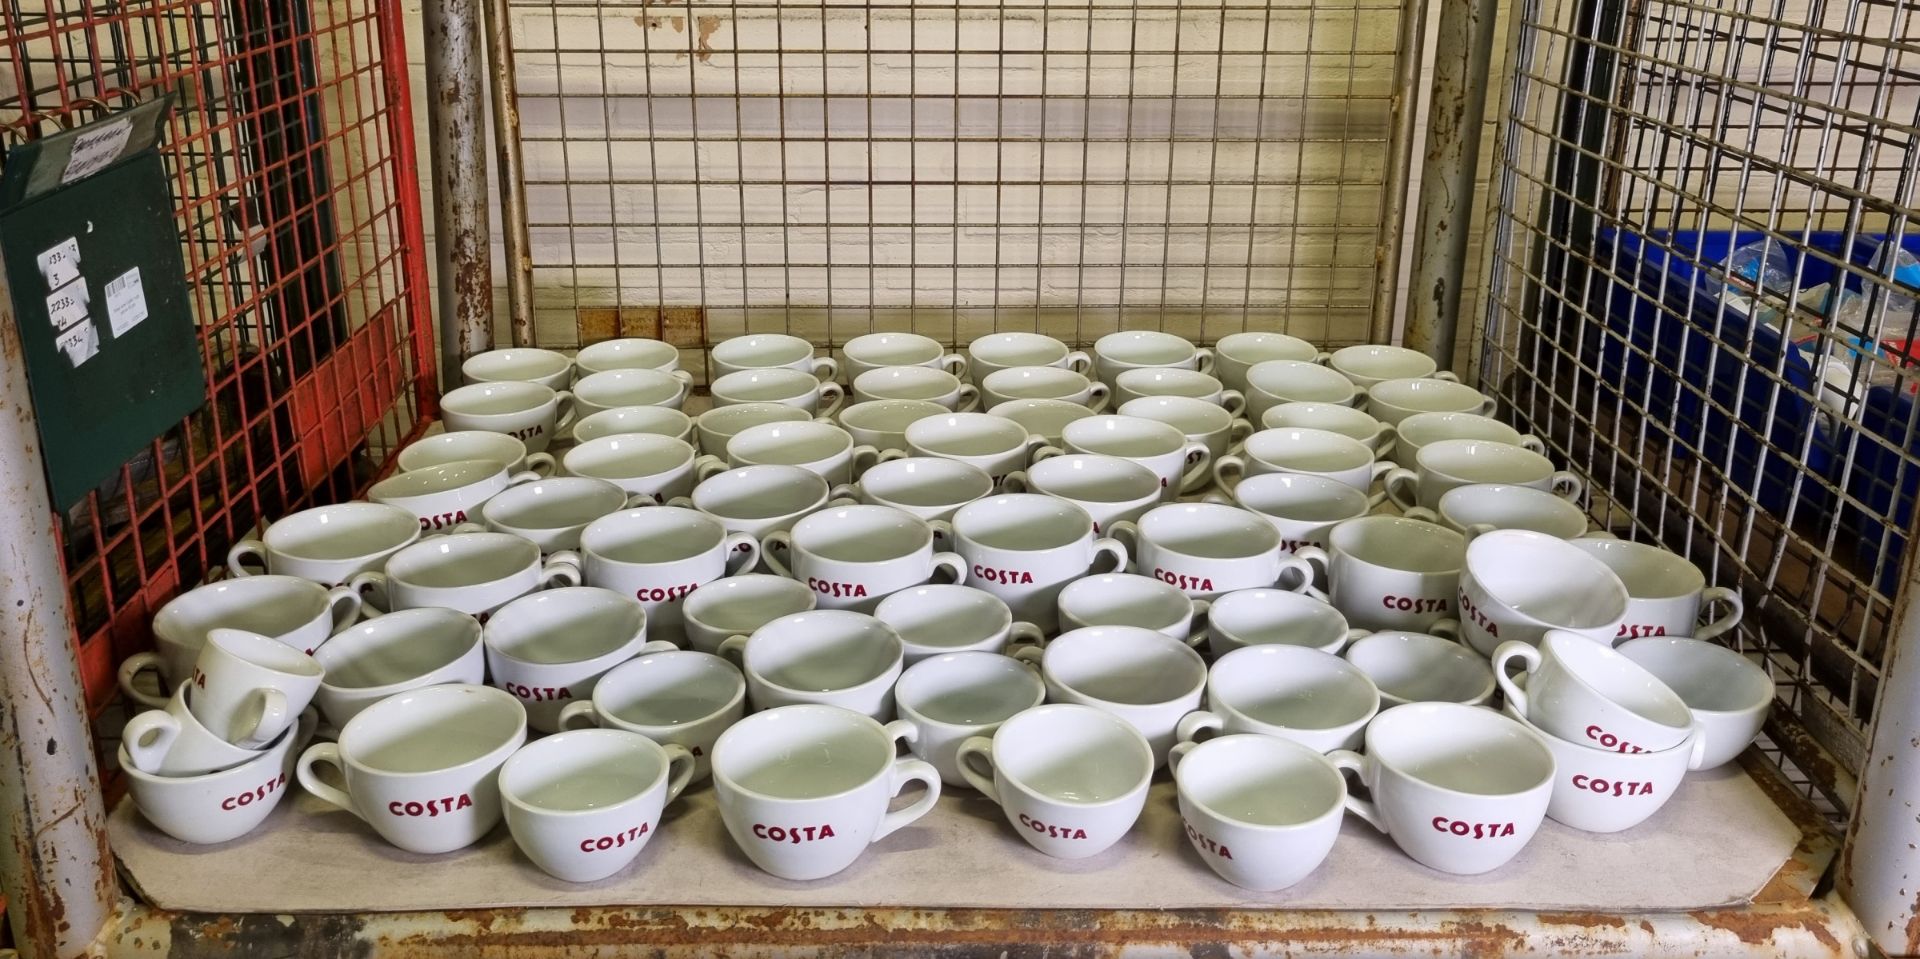 Mixed sized Costa coffee cups - approx 90